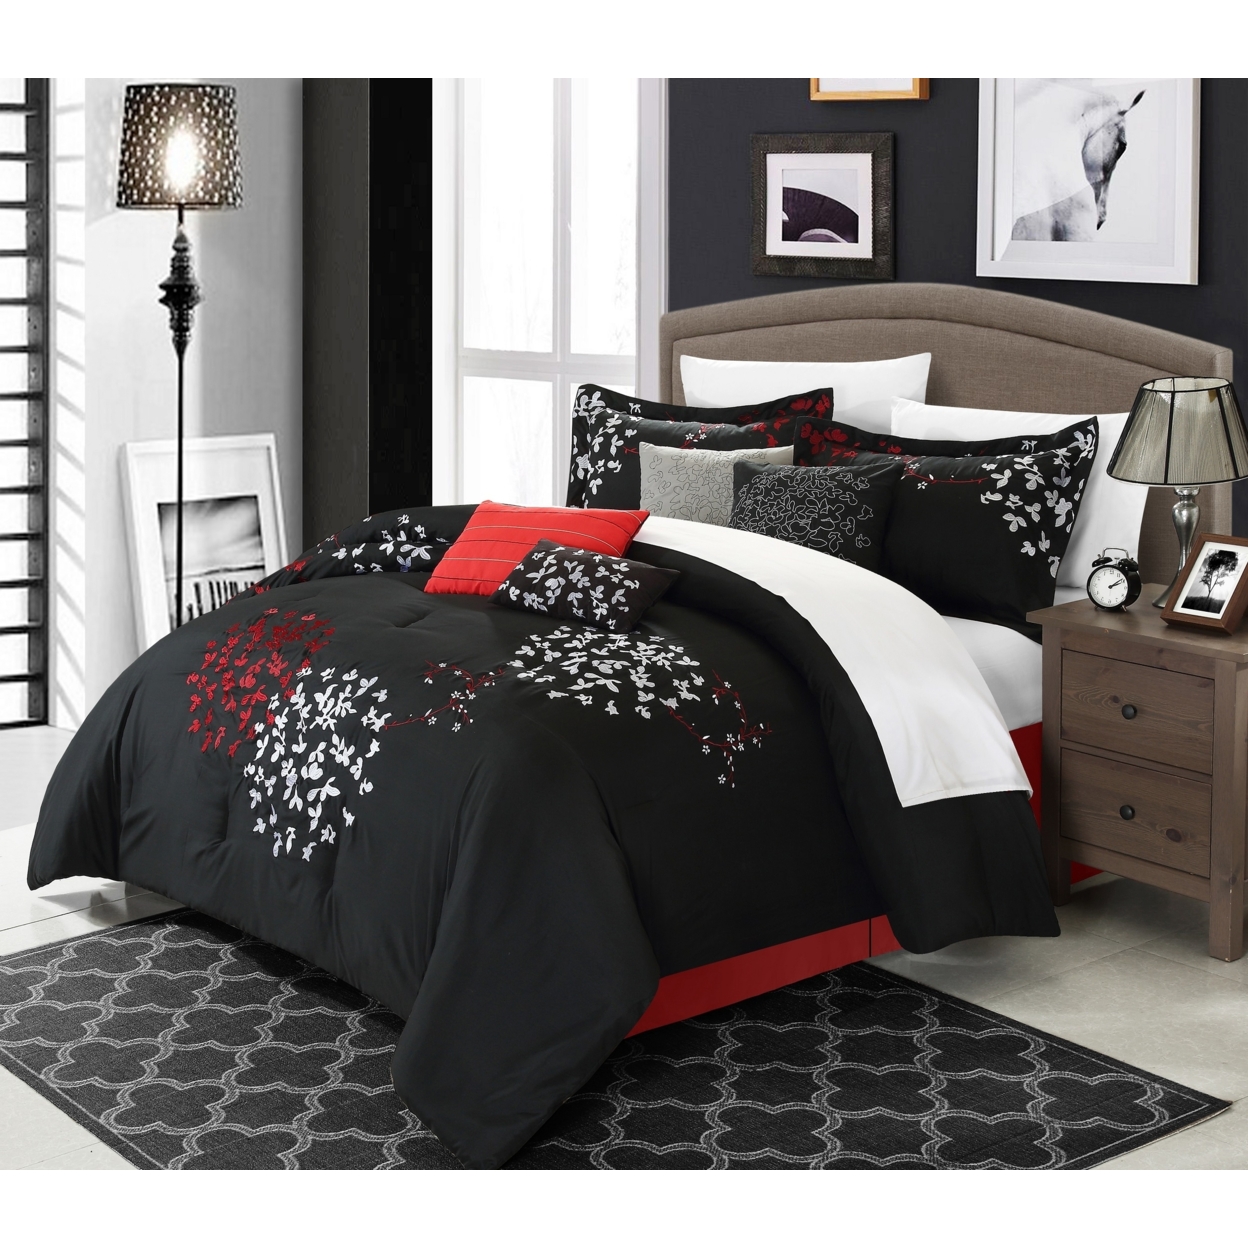 Cheila 8-Piece Embroidered Comforter Set - Black, King